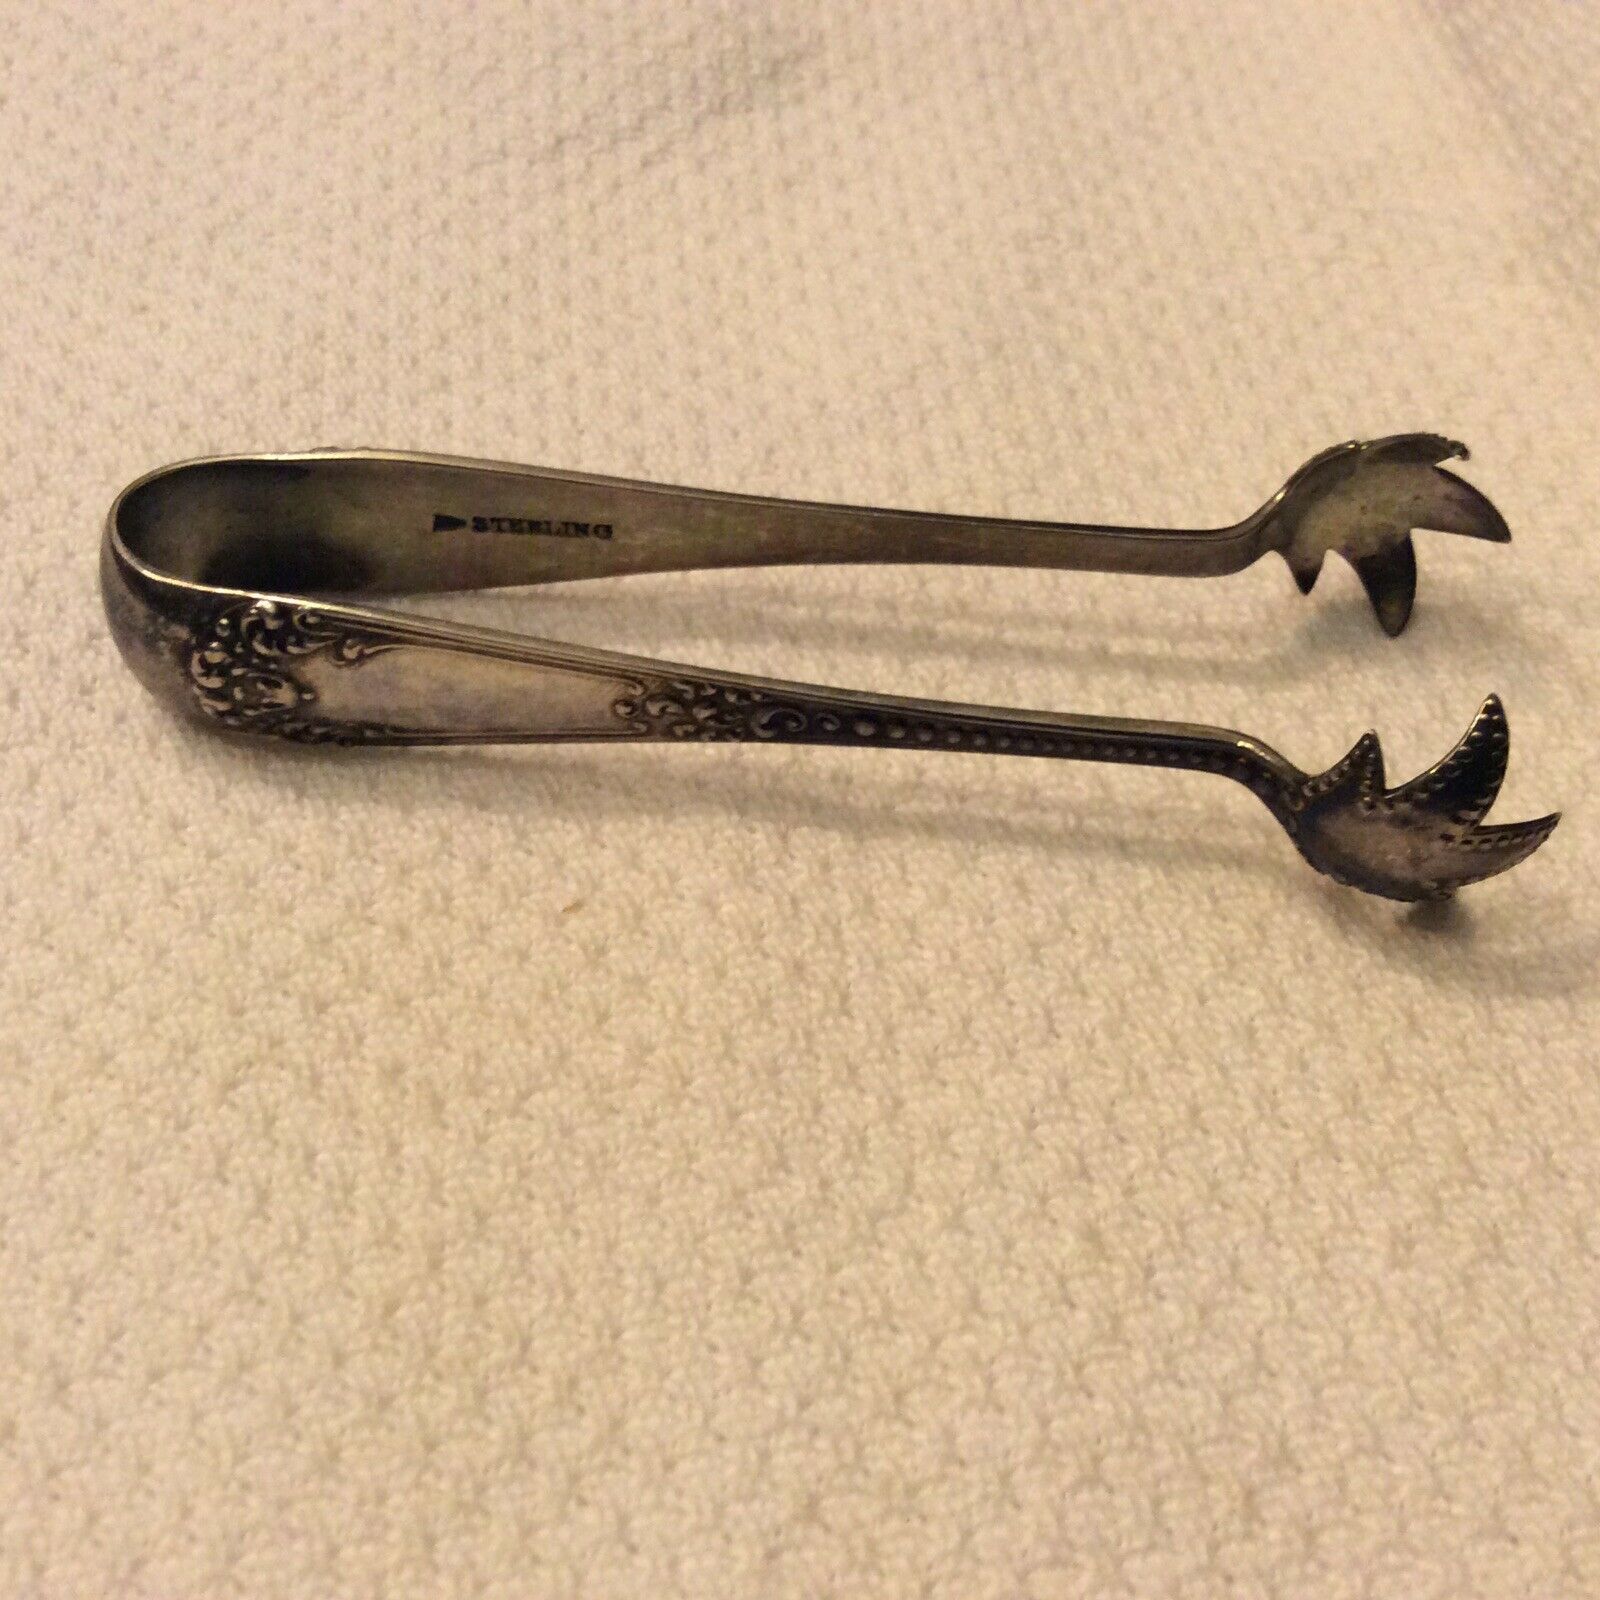 Vintage Antique Sterling Silver Claw Foot Sugar Cube Tongs, 3 1/4” Long